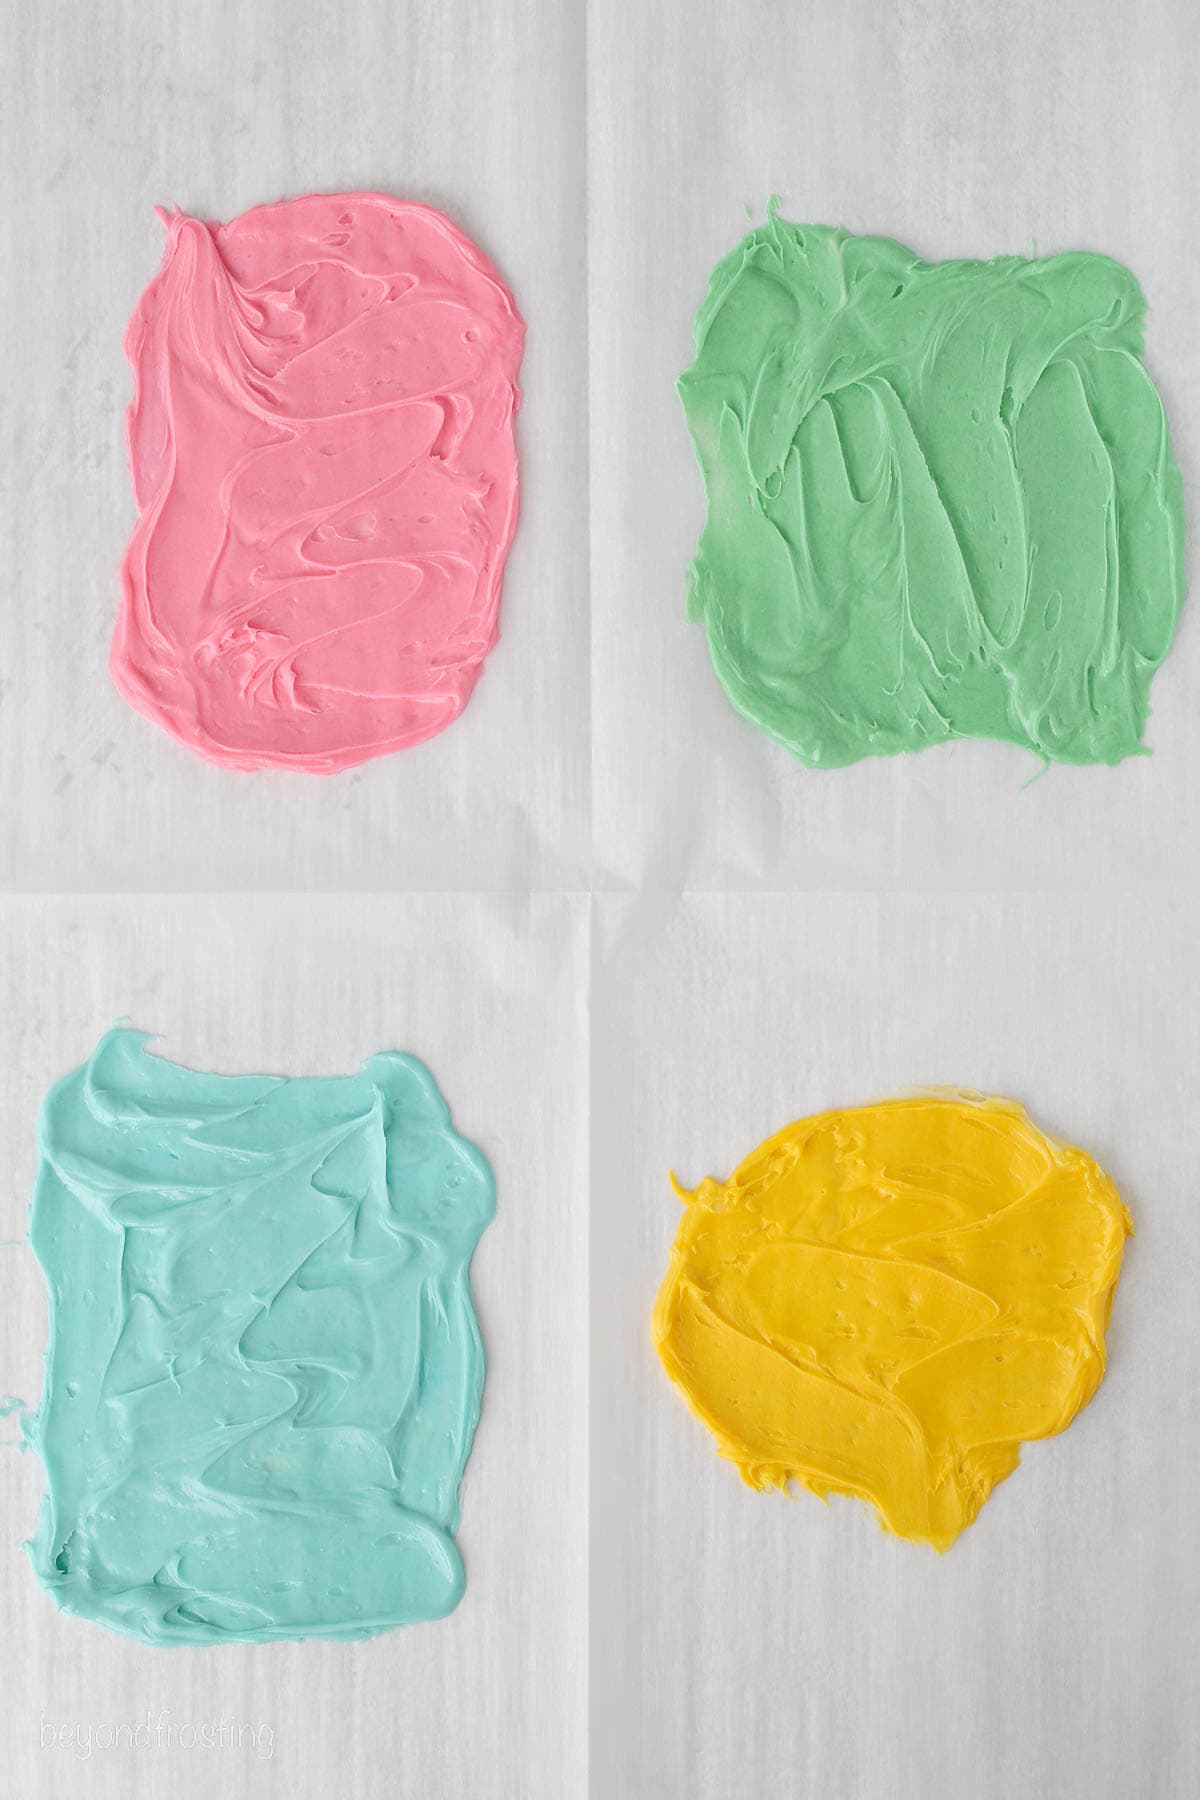 Pink, green, blue, and yellow melted chocolate spread into thin layers on a piece of parchment paper.